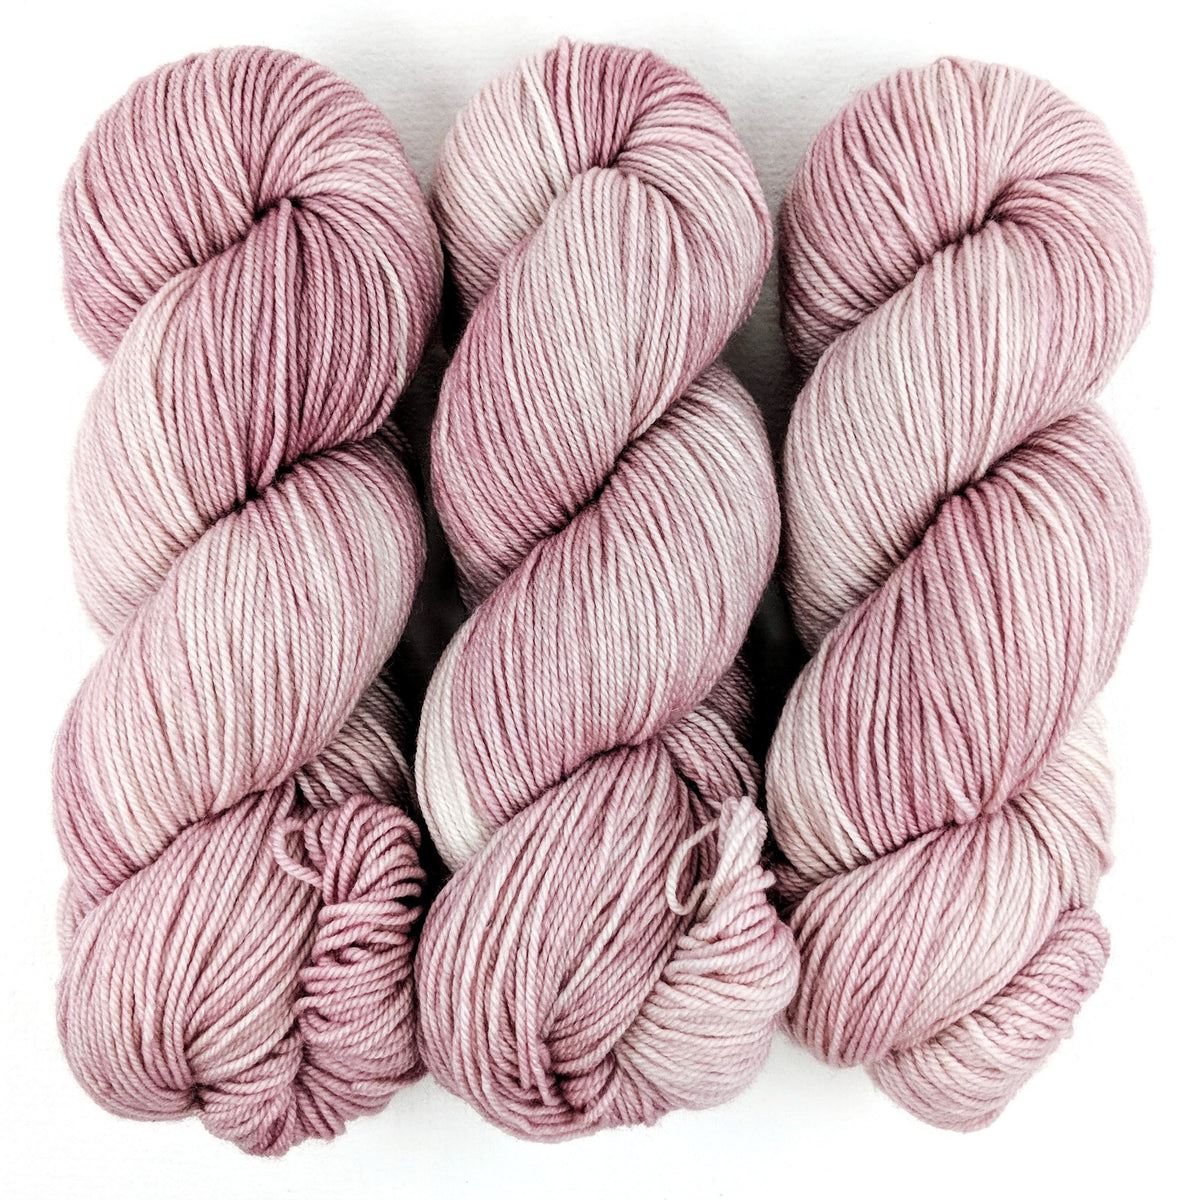 Apple Blossom in Worsted Weight